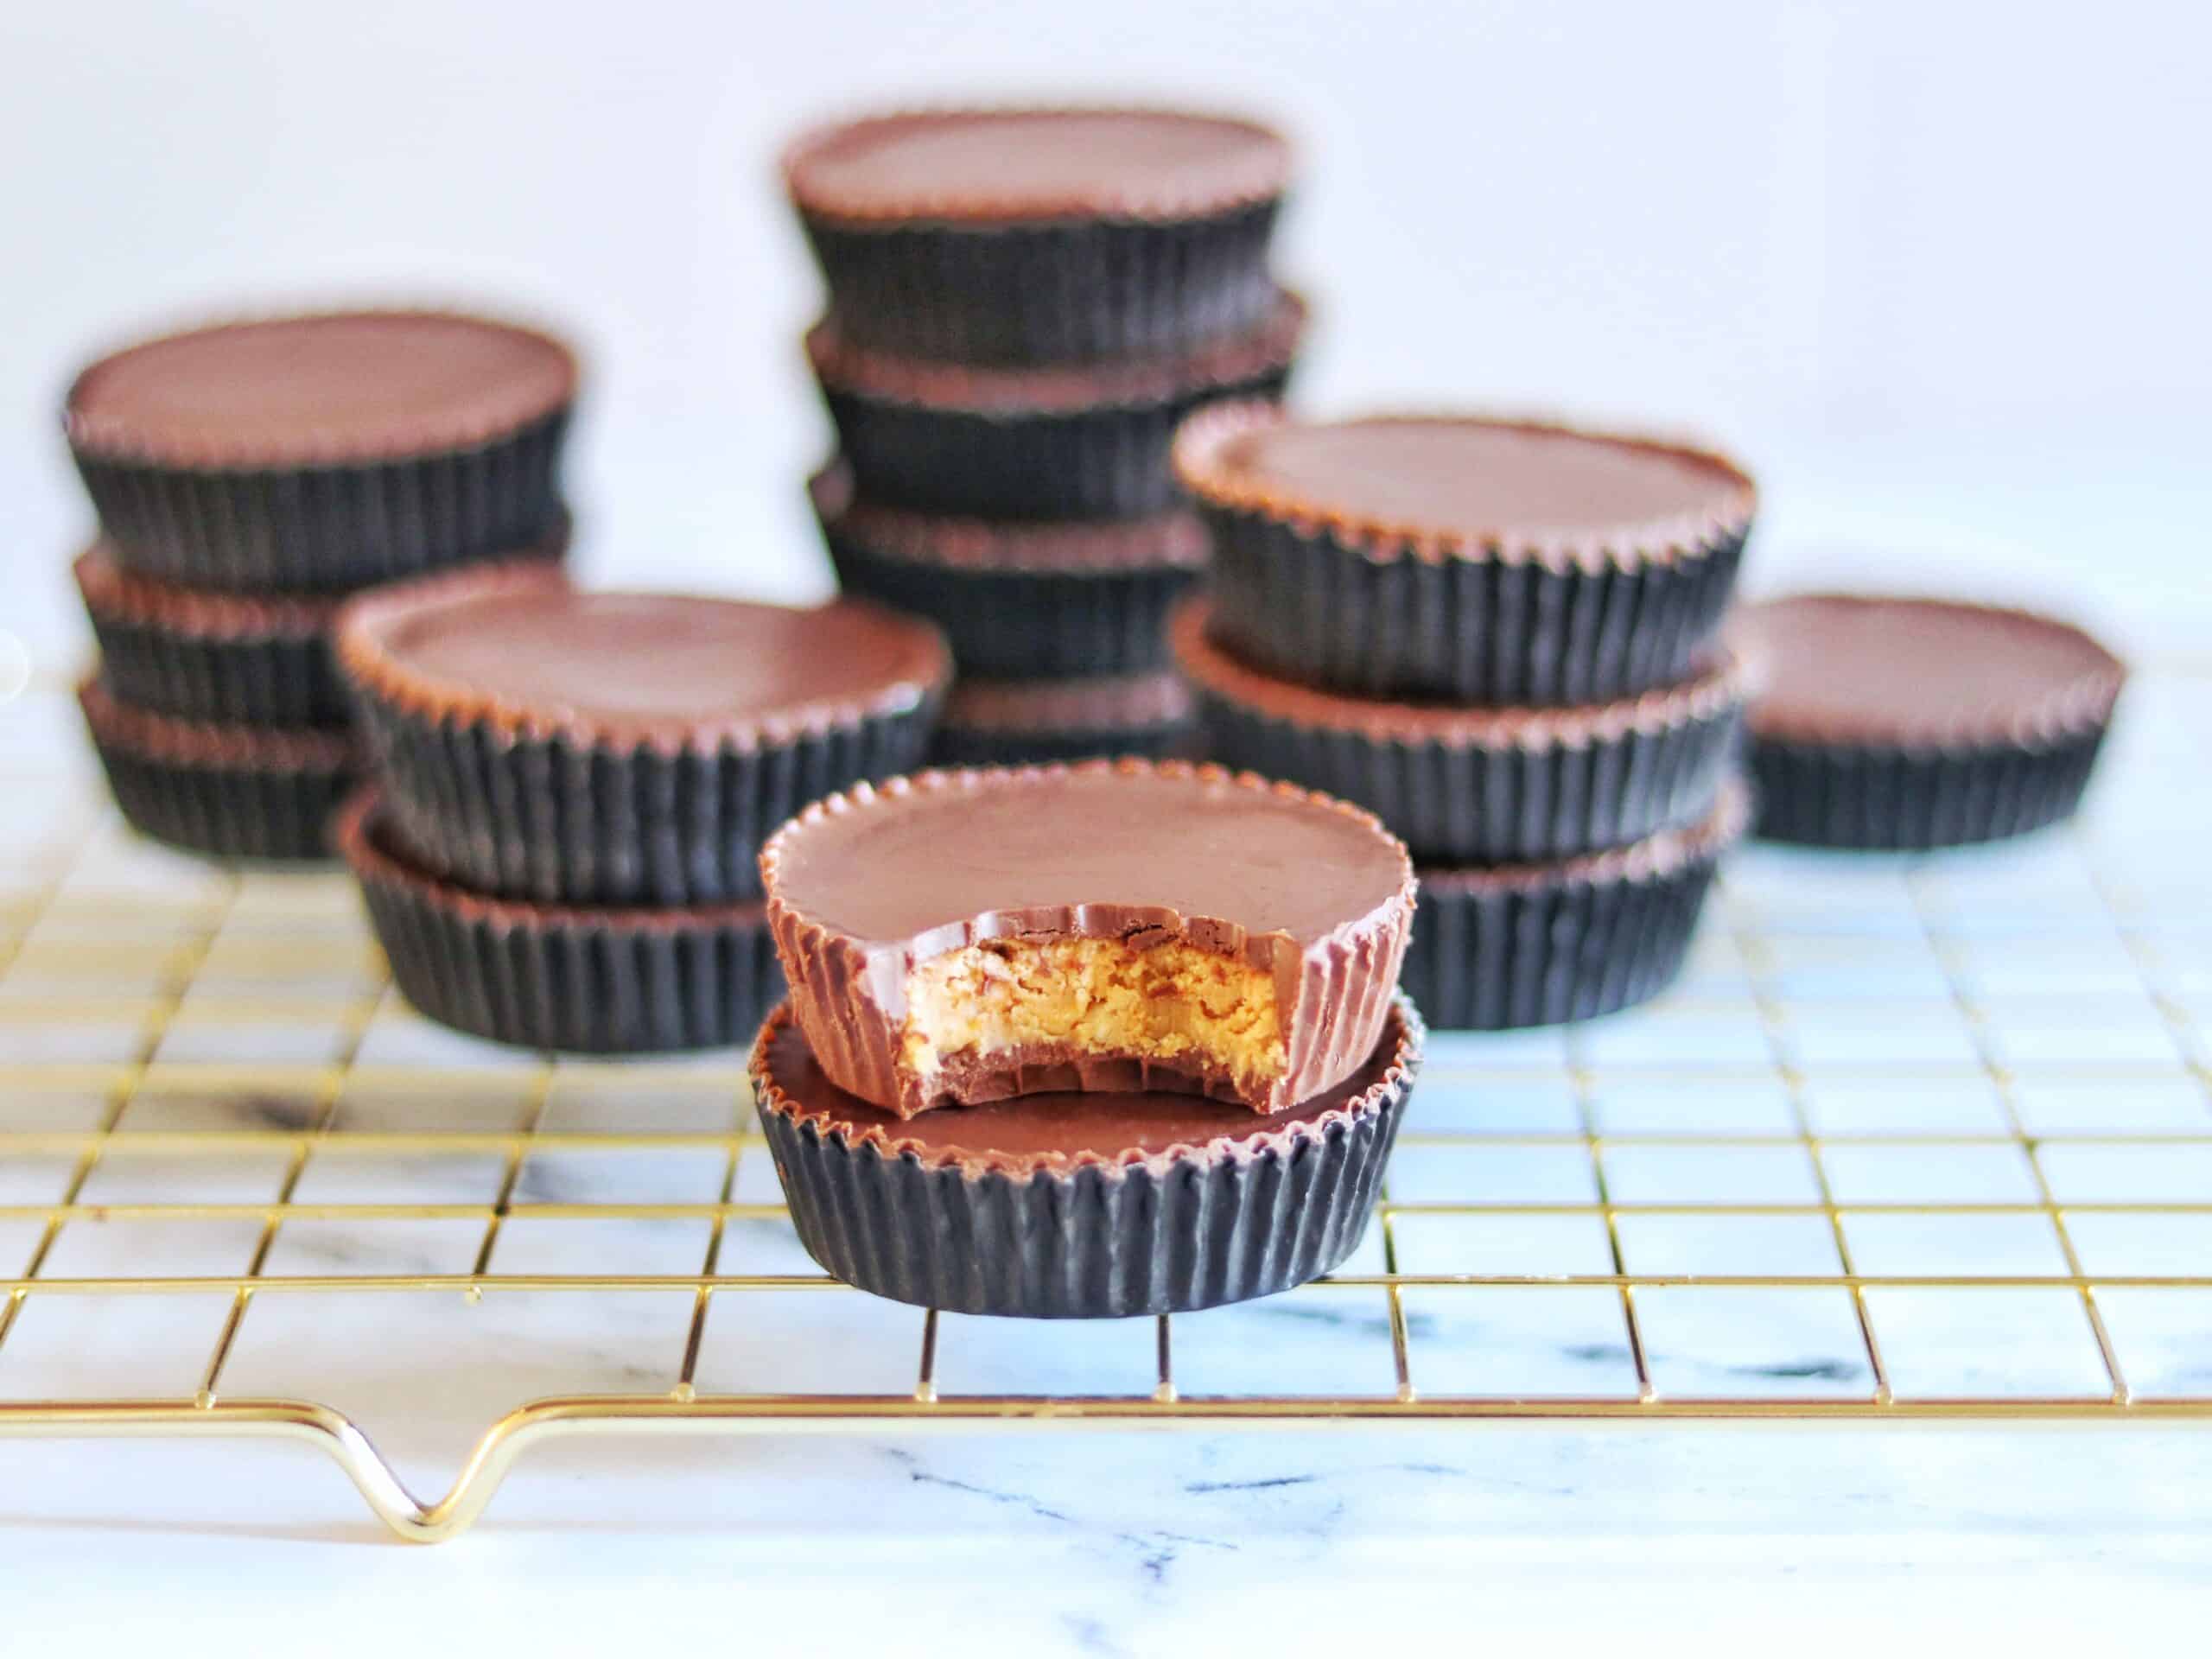 homemade Reese's cups (crunchy peanut butter cups recipe)